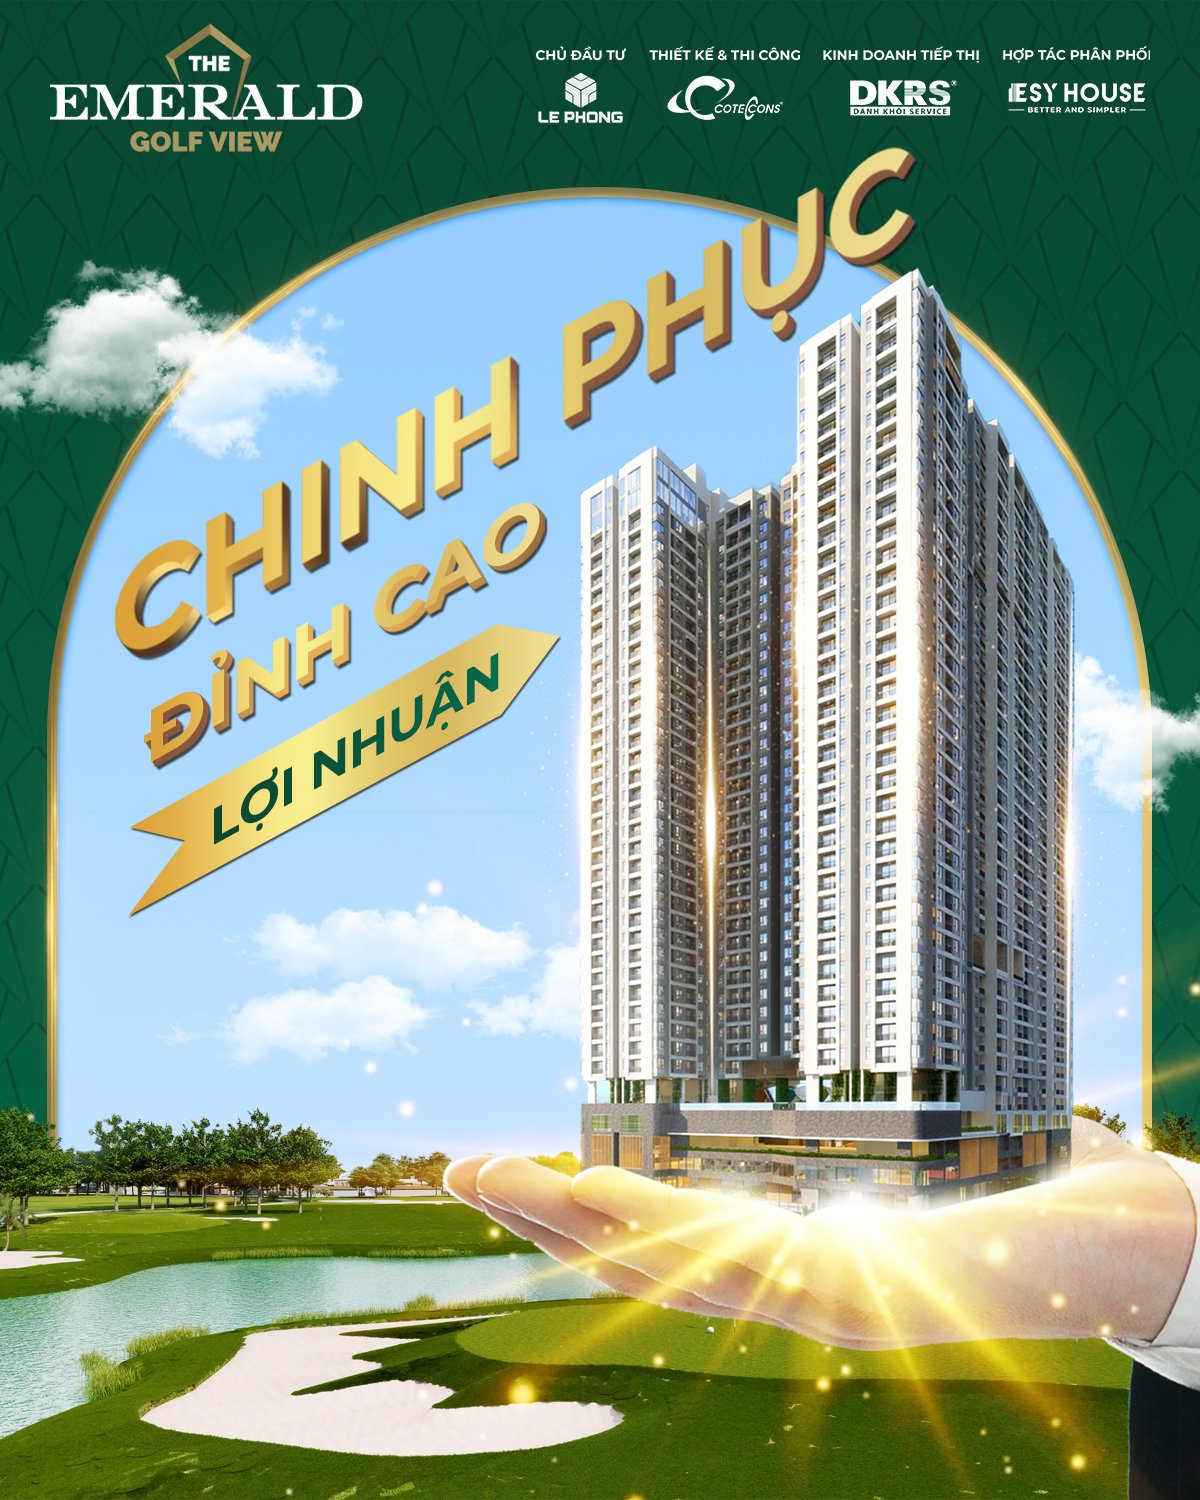 Loi nhuan dinh cao can ho The Emerald Golf View